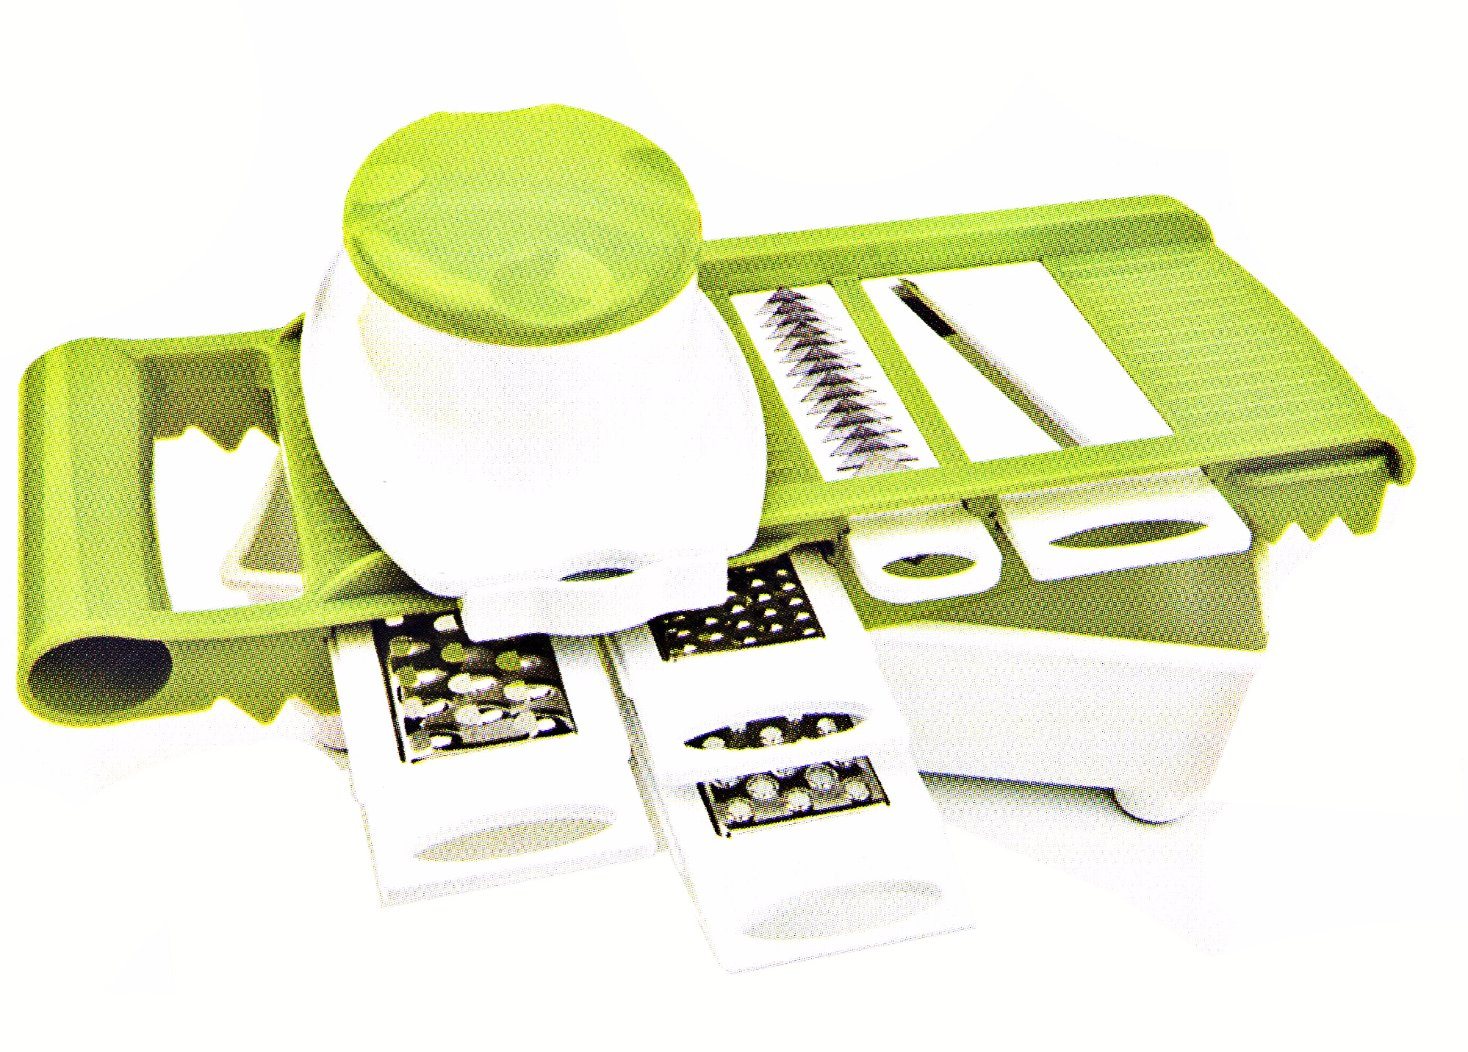 5 in 1 Plastic Food Processor Vegetable Slicer Cutting Machine with Steel Parts No. Cg023